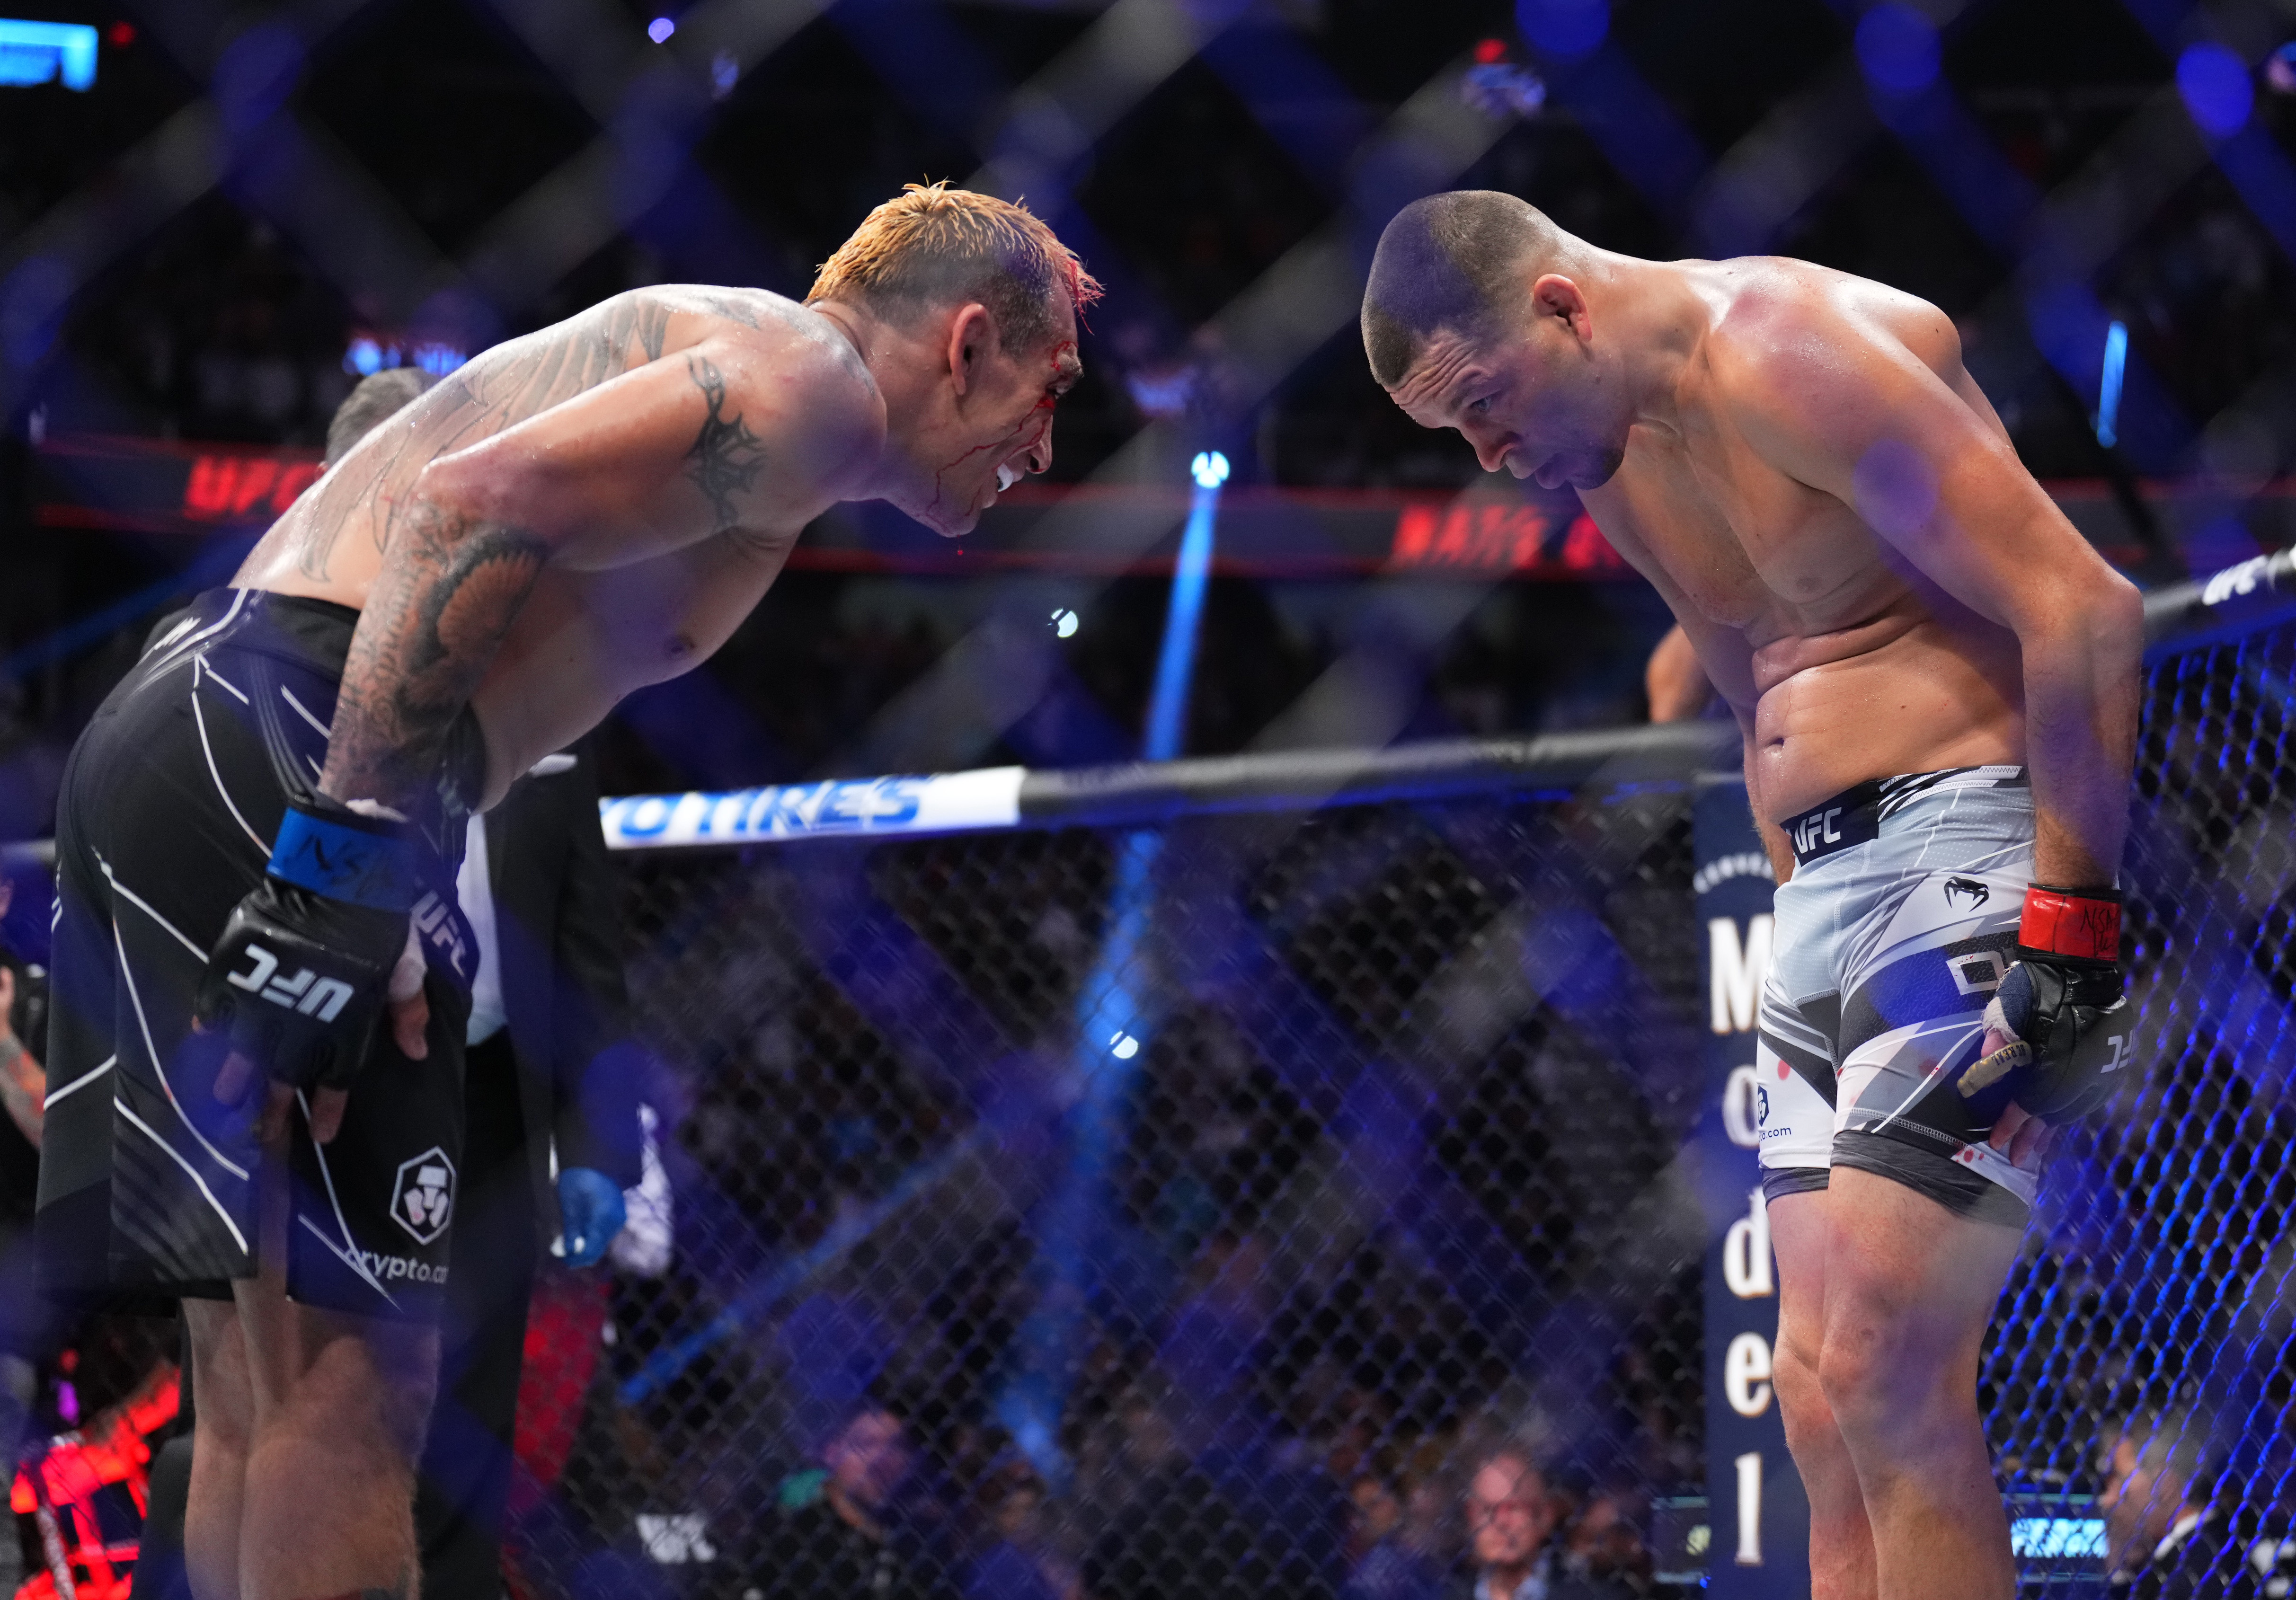 Nate Diaz and Tony Ferguson bow at each other after their UFC 279 headliner.